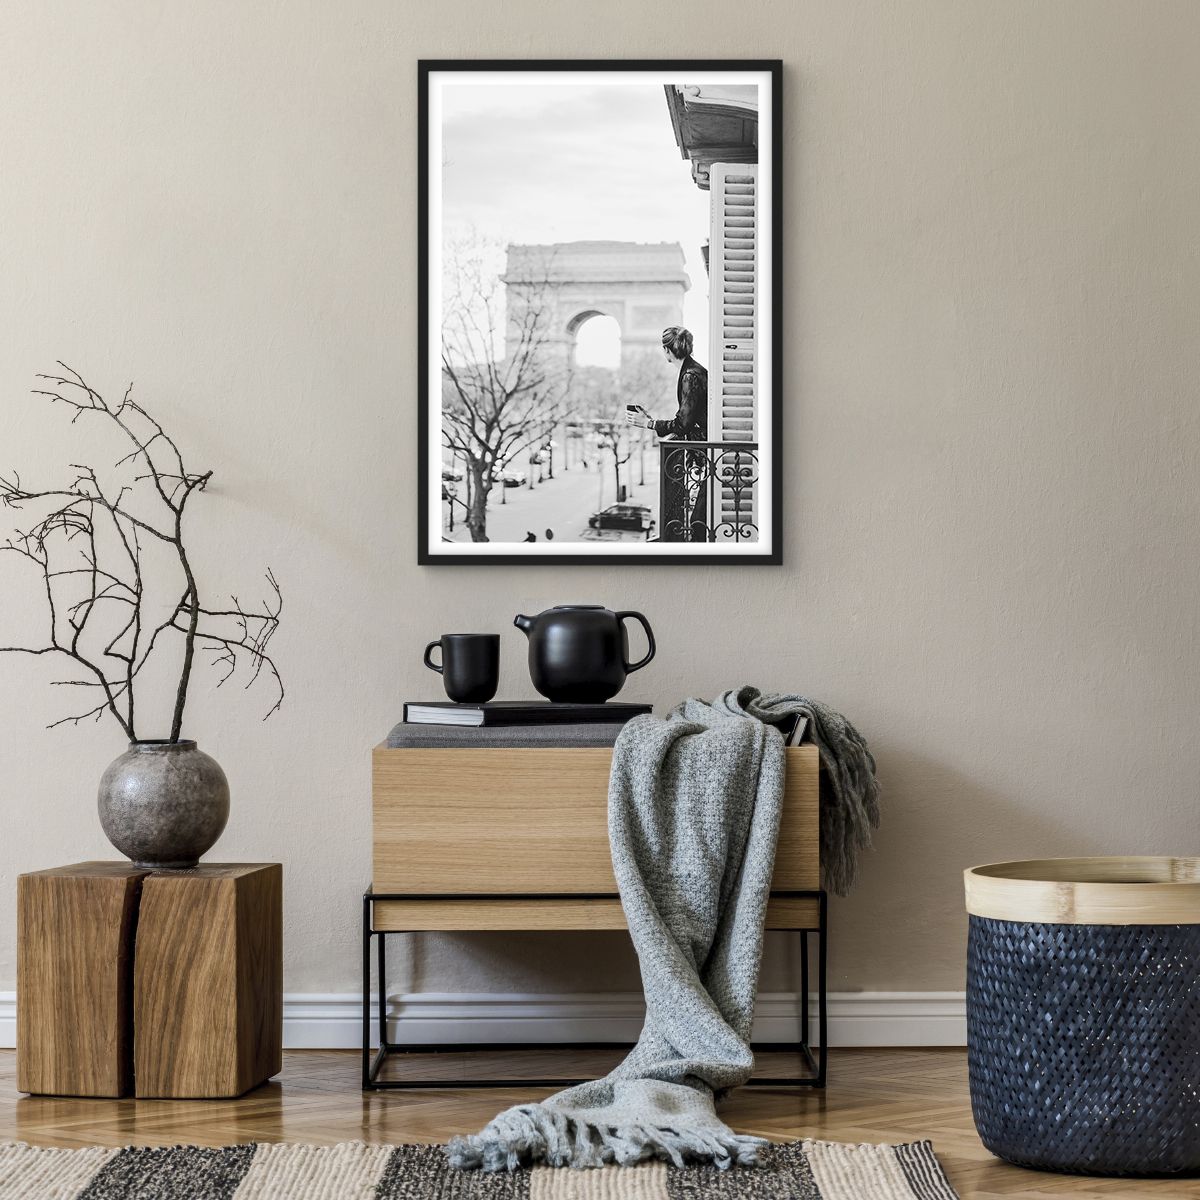 Poster in Black Frame Triumphal Arch, Poster in Black Frame Paris, Poster in Black Frame Architecture, Poster in Black Frame Woman, Poster in Black Frame Black And White